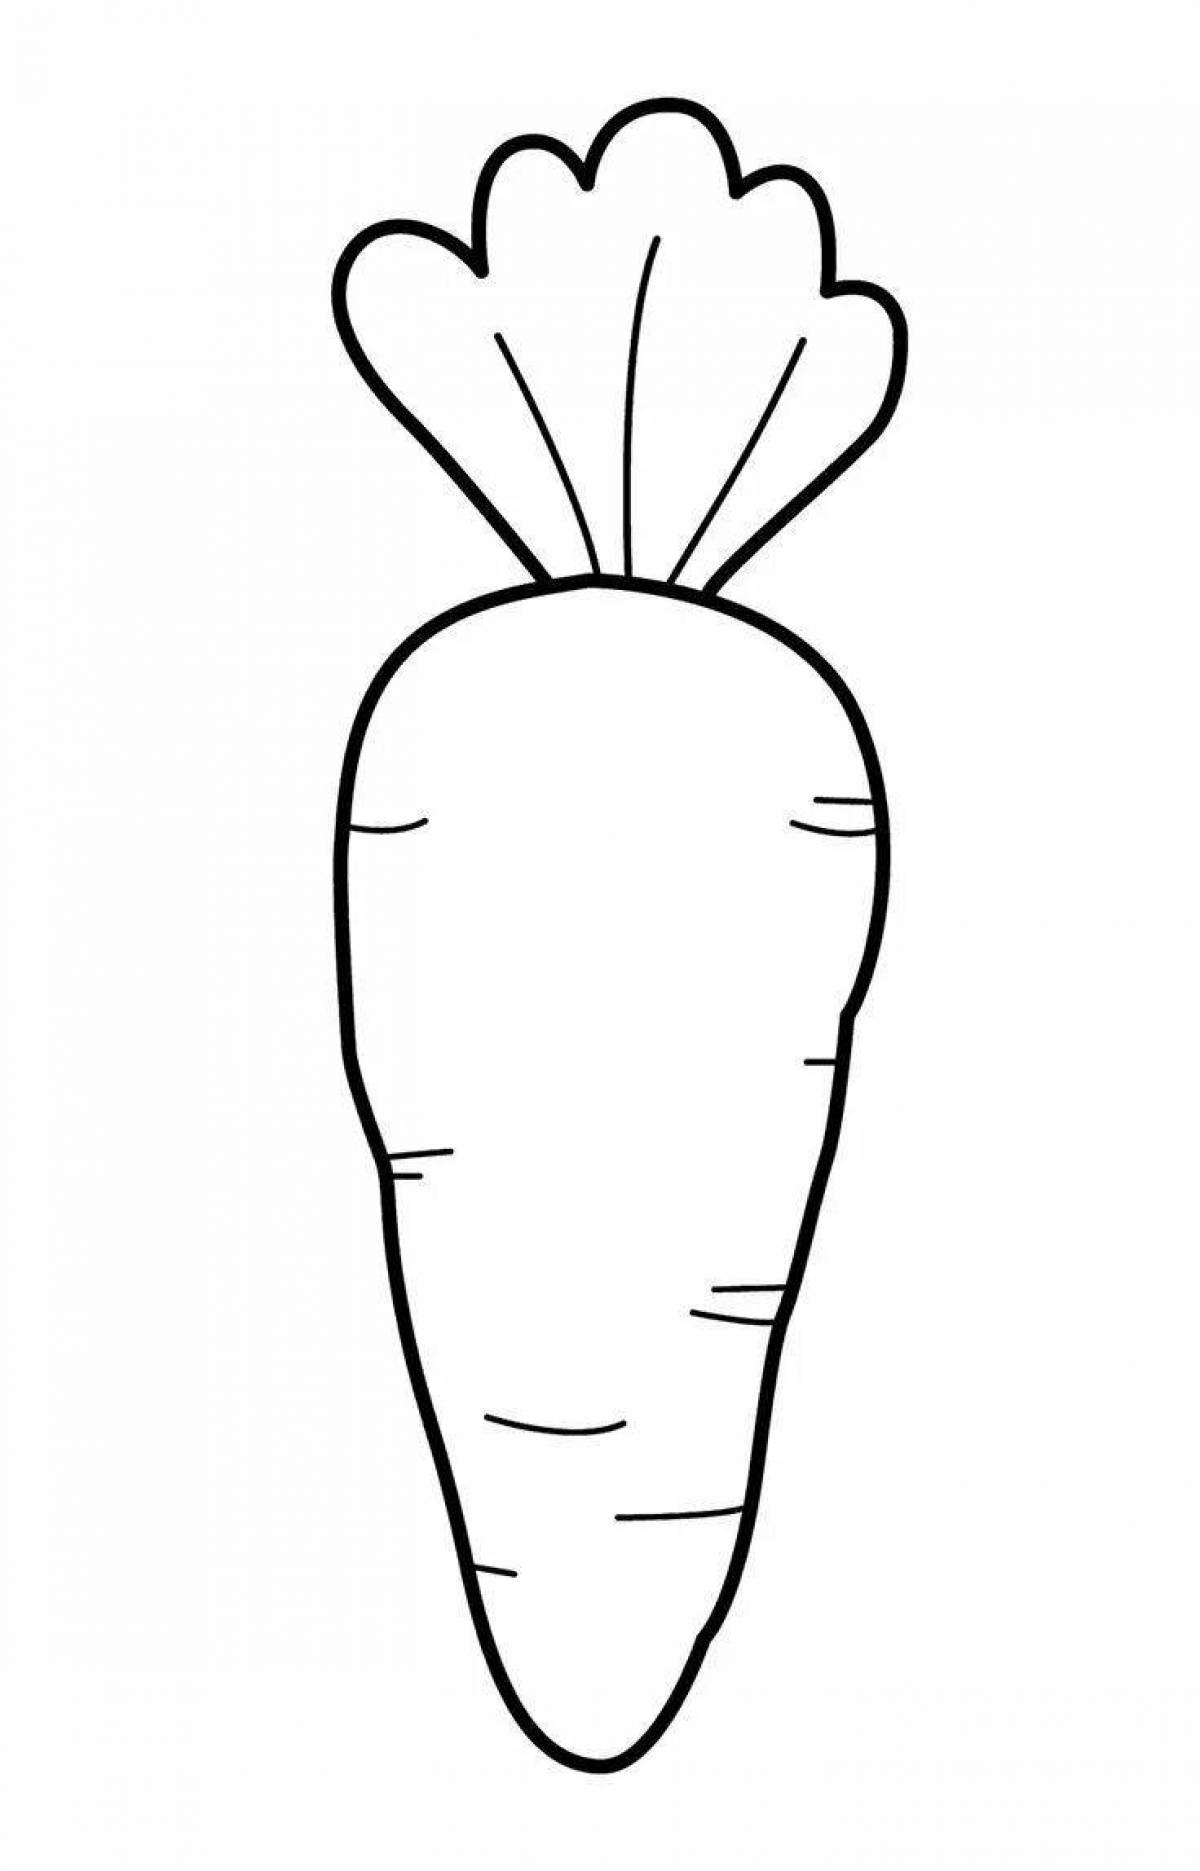 Magic carrot coloring page